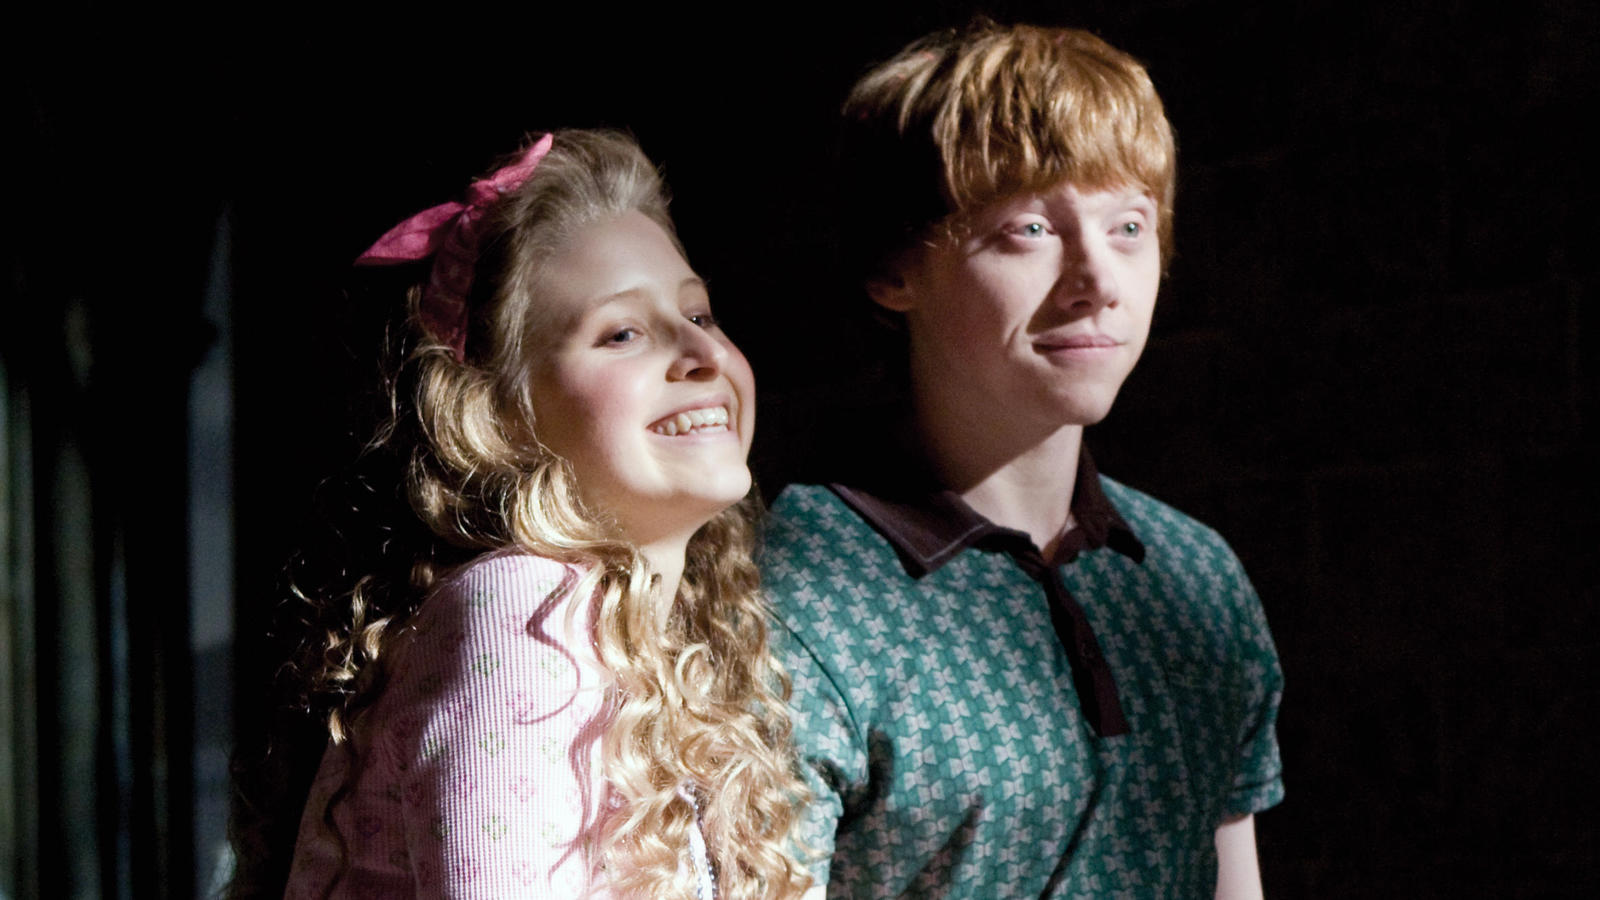 HARRY POTTER AND THE HALF BLOOD PRINCE [BR / US 2009] JESSIE CAVE as Lavender Brown, RUPERT GRINT as Ron Weasley Date: 2009